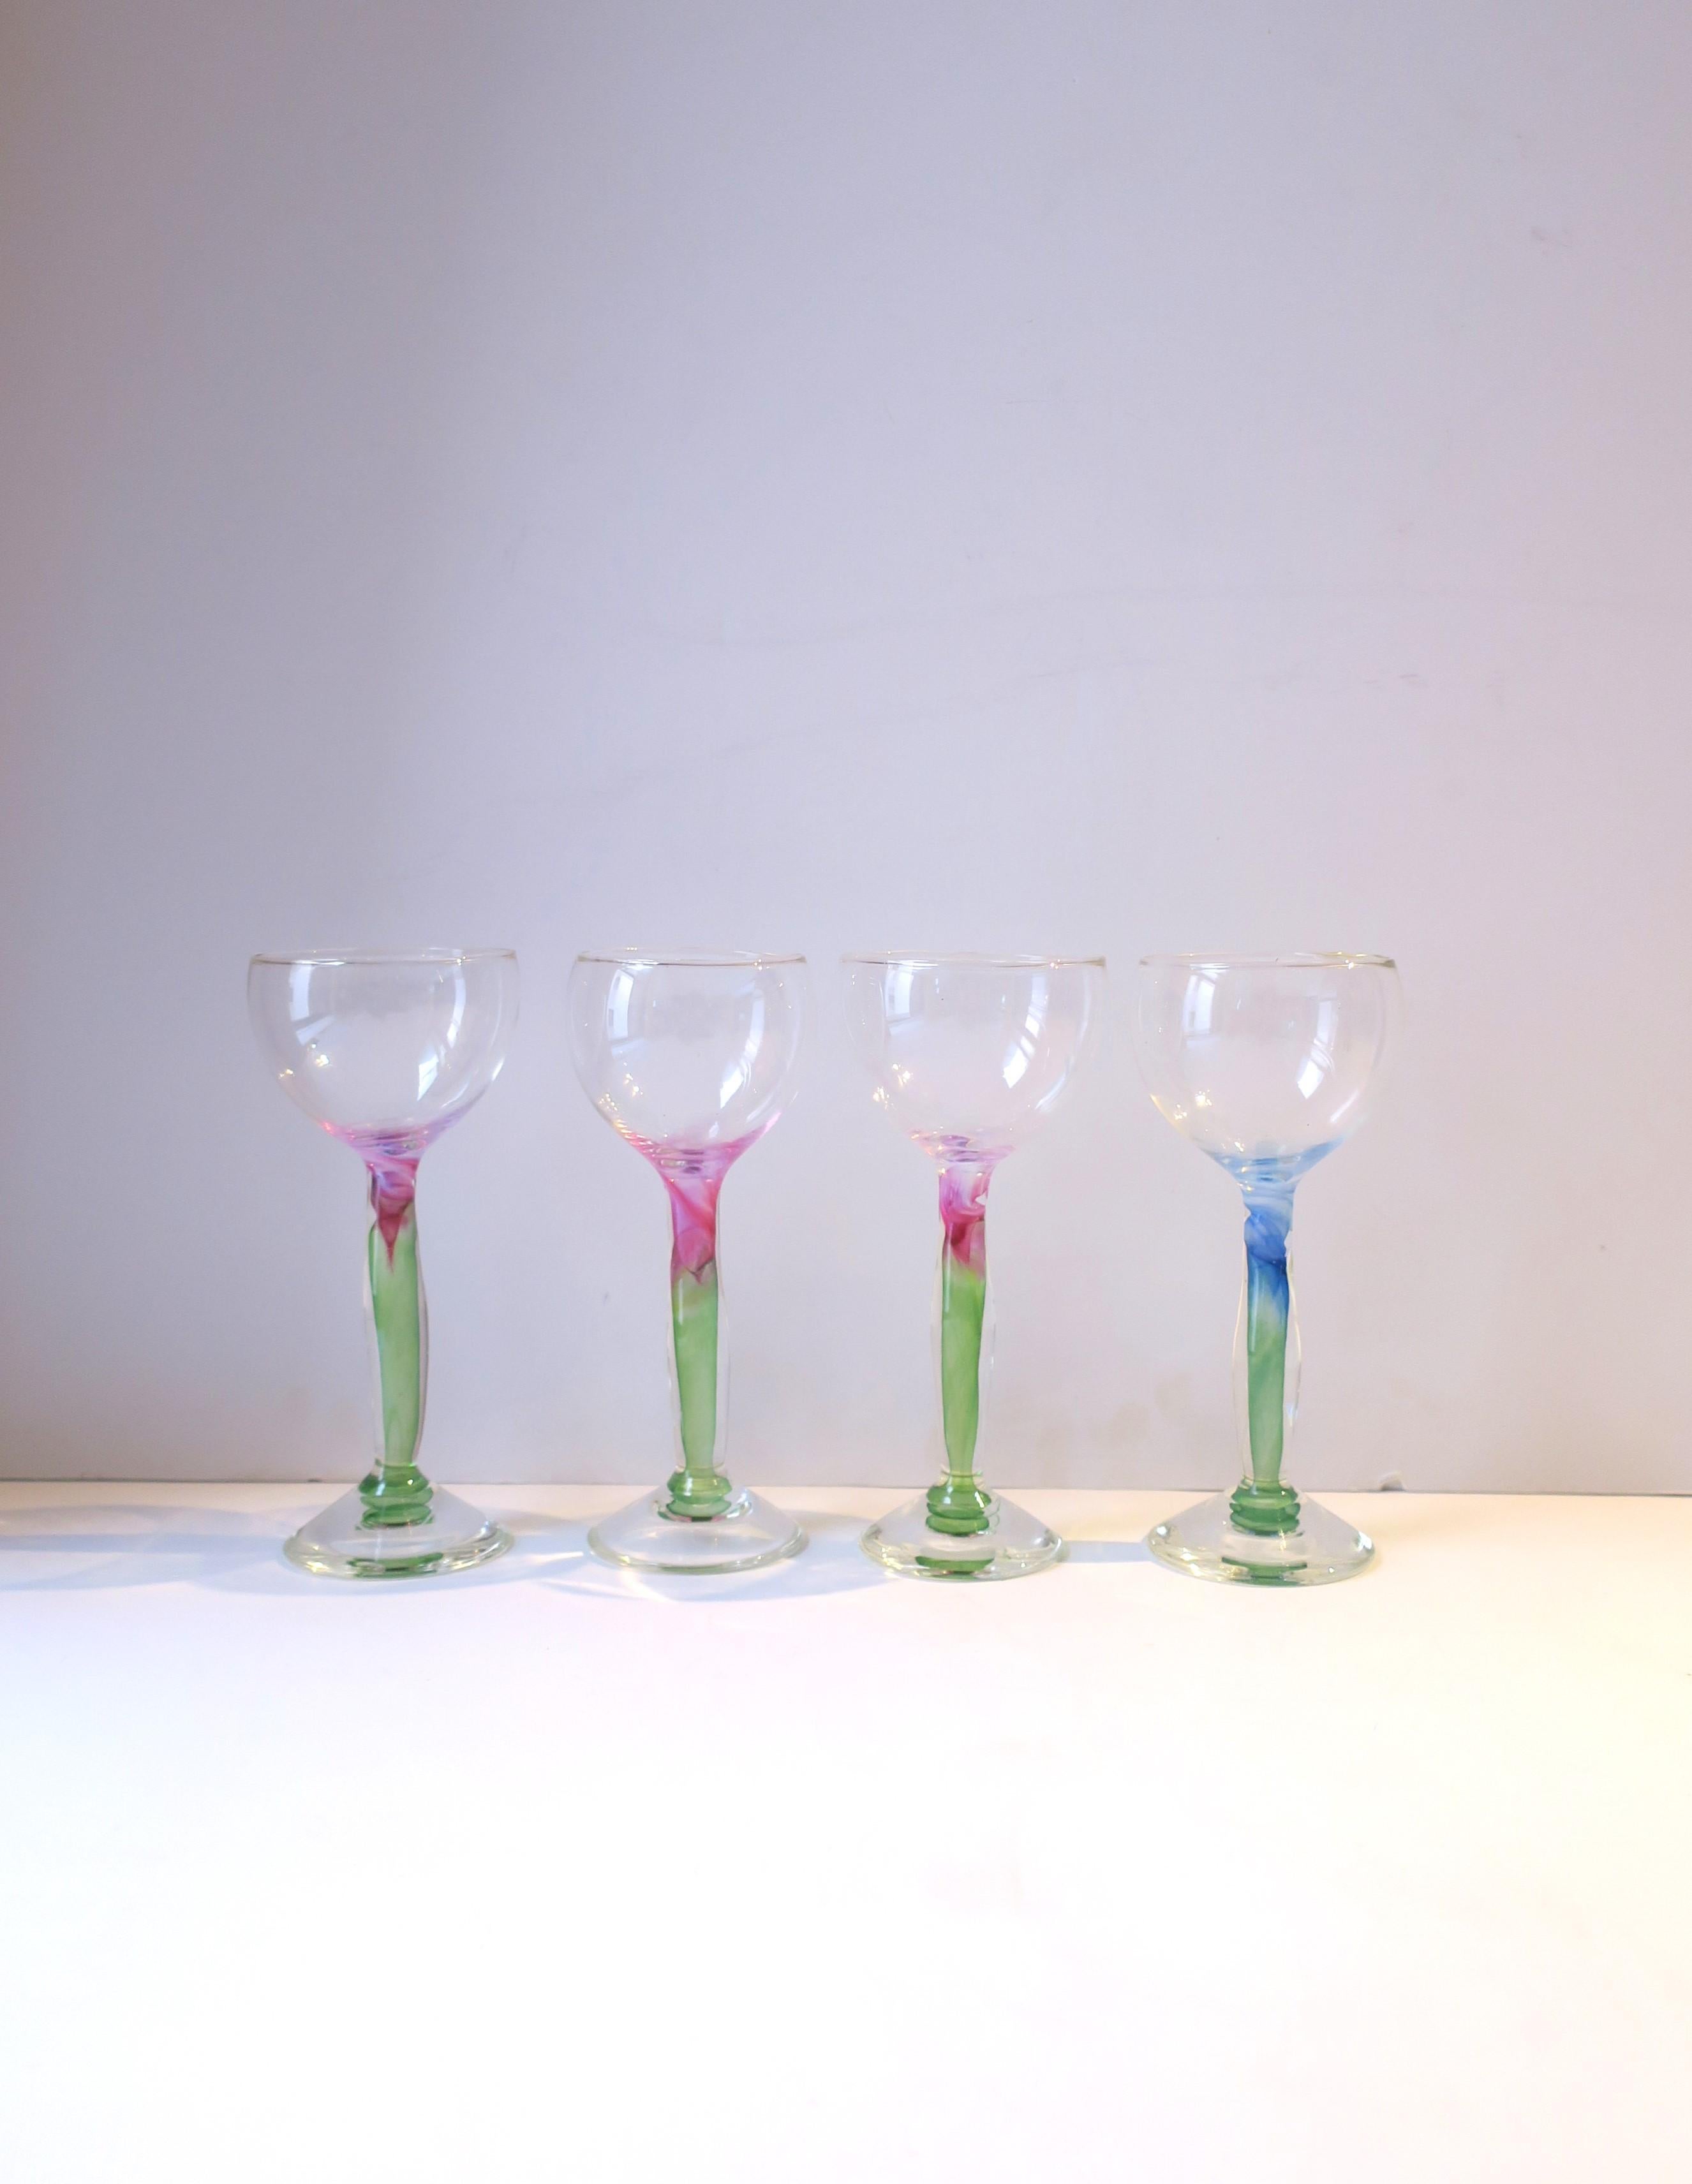 A beautiful set of four (4) water, wine, or cocktail glasses with an organic design, signed. Stems have an organic shape, three (3) with magenta pink and green art glass hues, and one with blue with green. All are signed on underside, closeup in